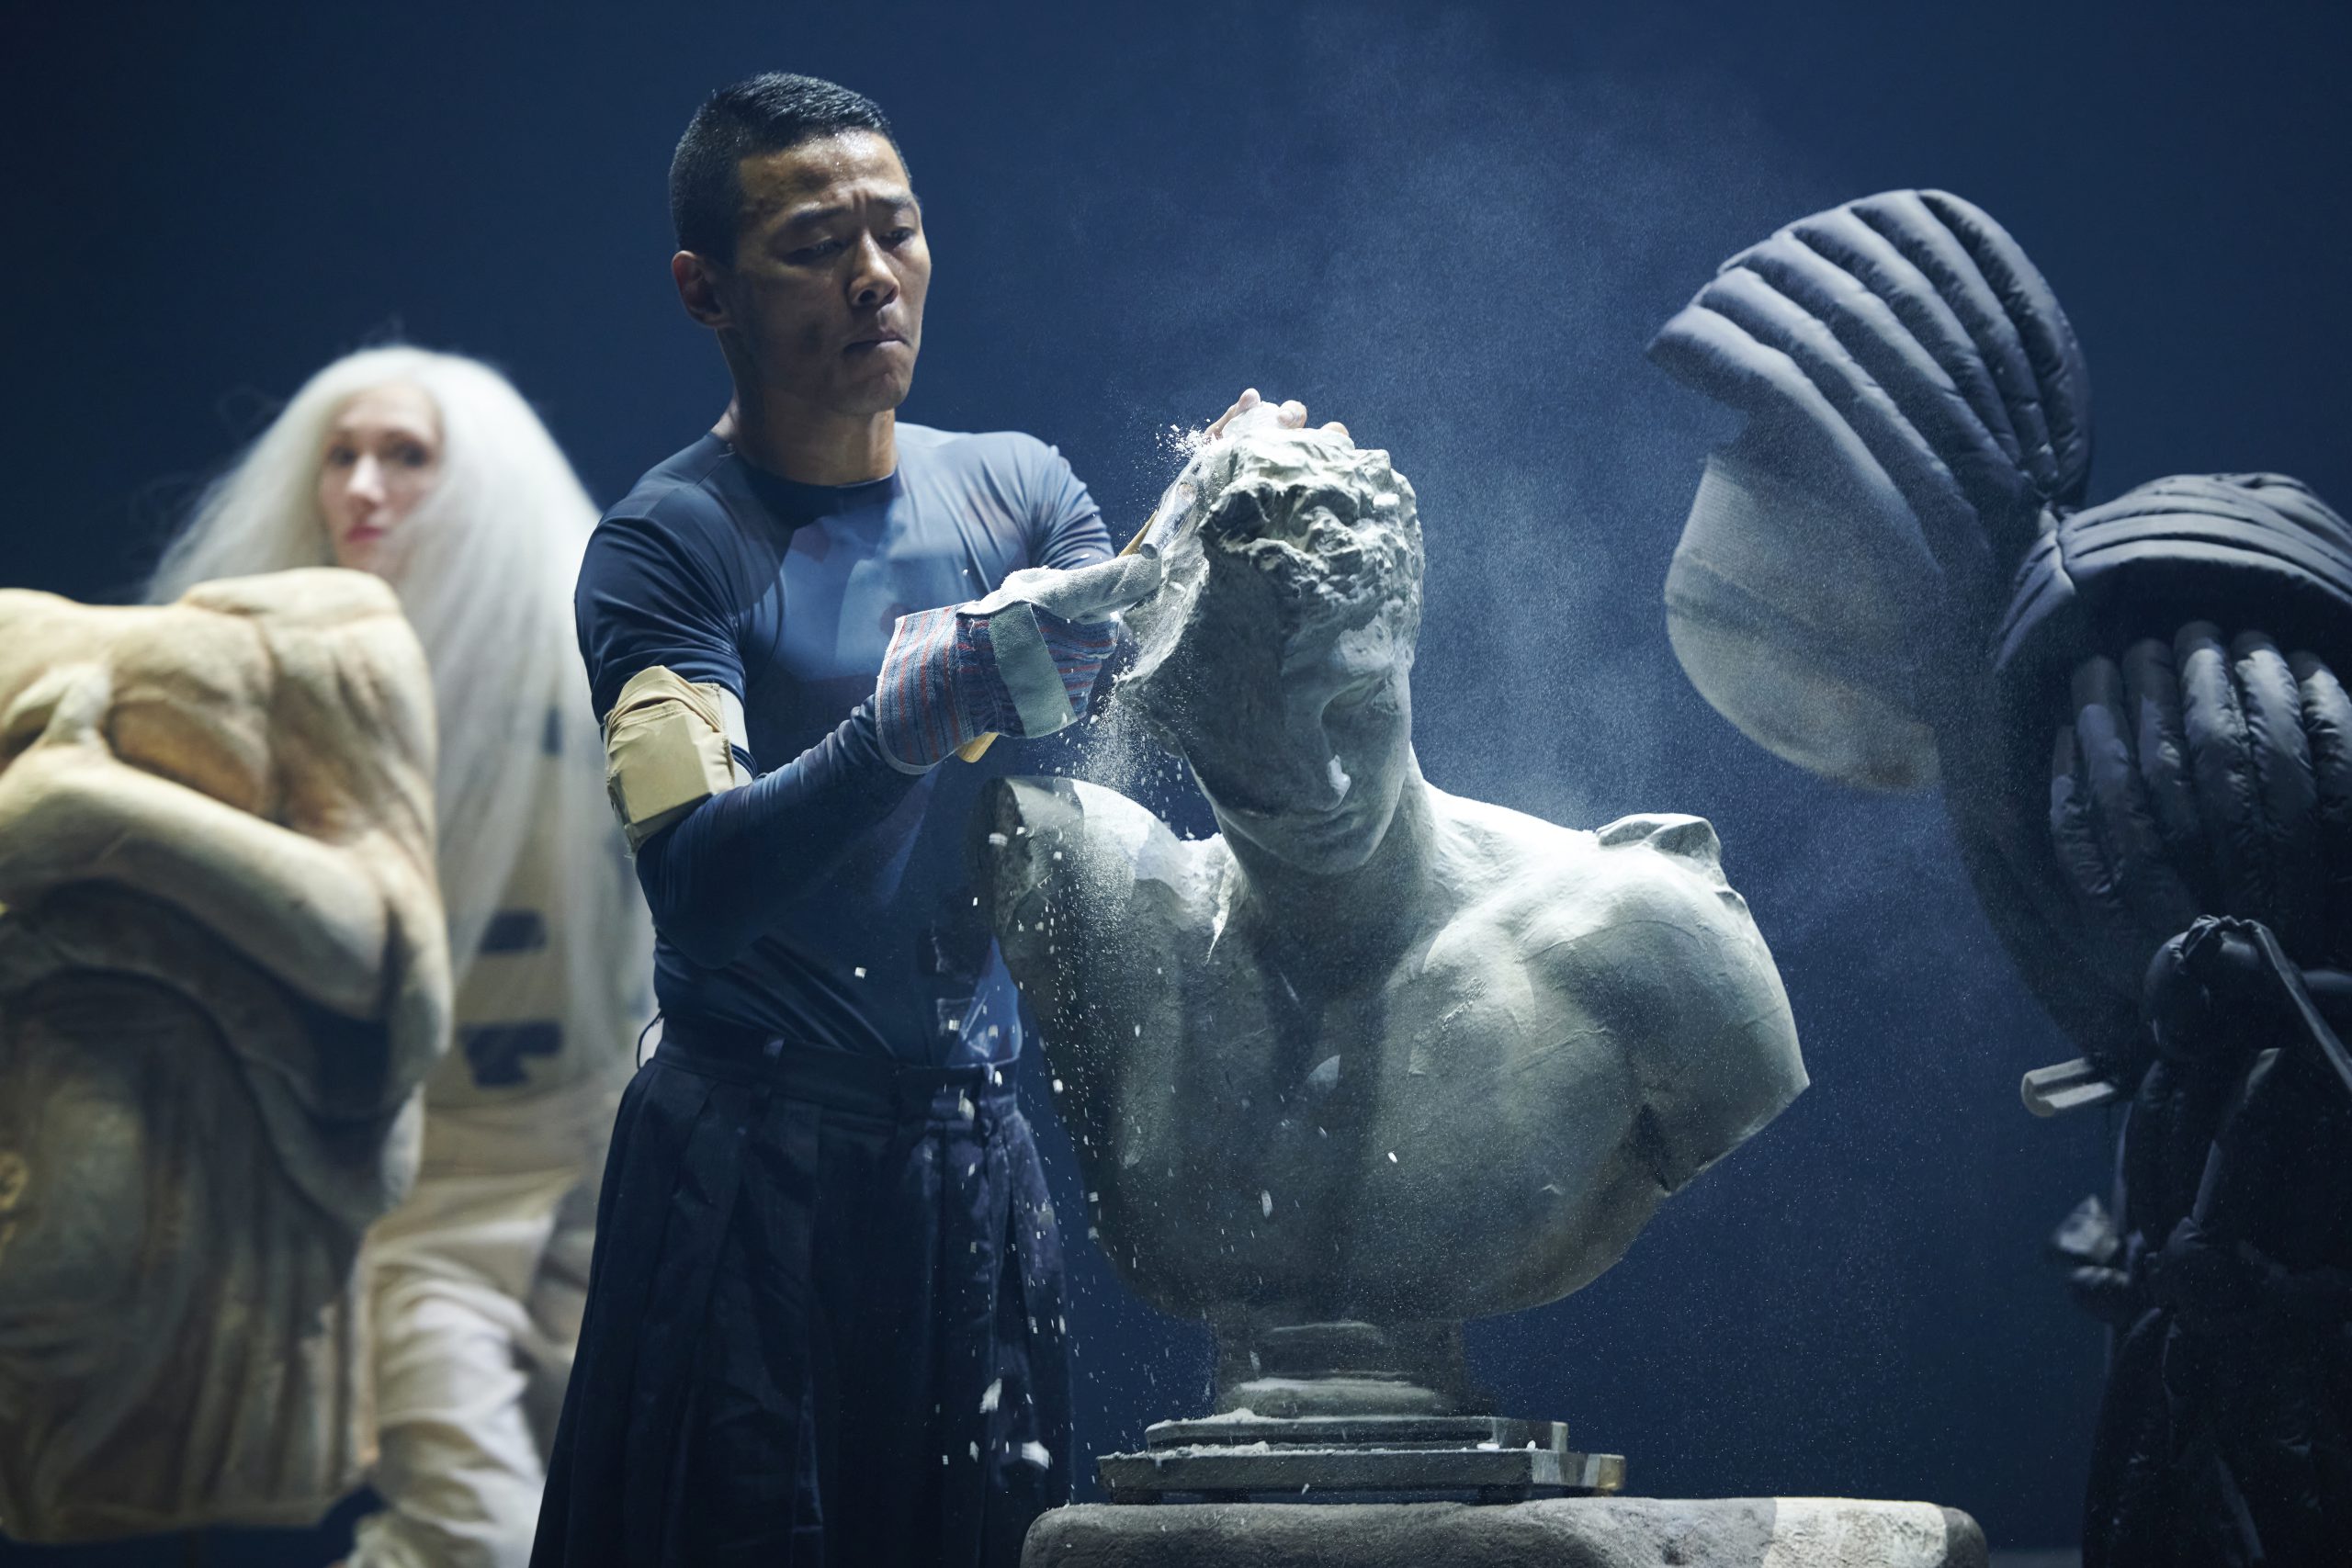 A man is carving a bust statue in a dark and dusty room. The person is wearing a long-sleeved blue shirt, gloves. The bust statue depicts a male figure with detailed facial features and musculature. In the background, more dancers can be seen, suggesting that this is taking place on a stage. The lighting in the room highlights the dust particles in the air and gives the scene an almost ethereal quality.